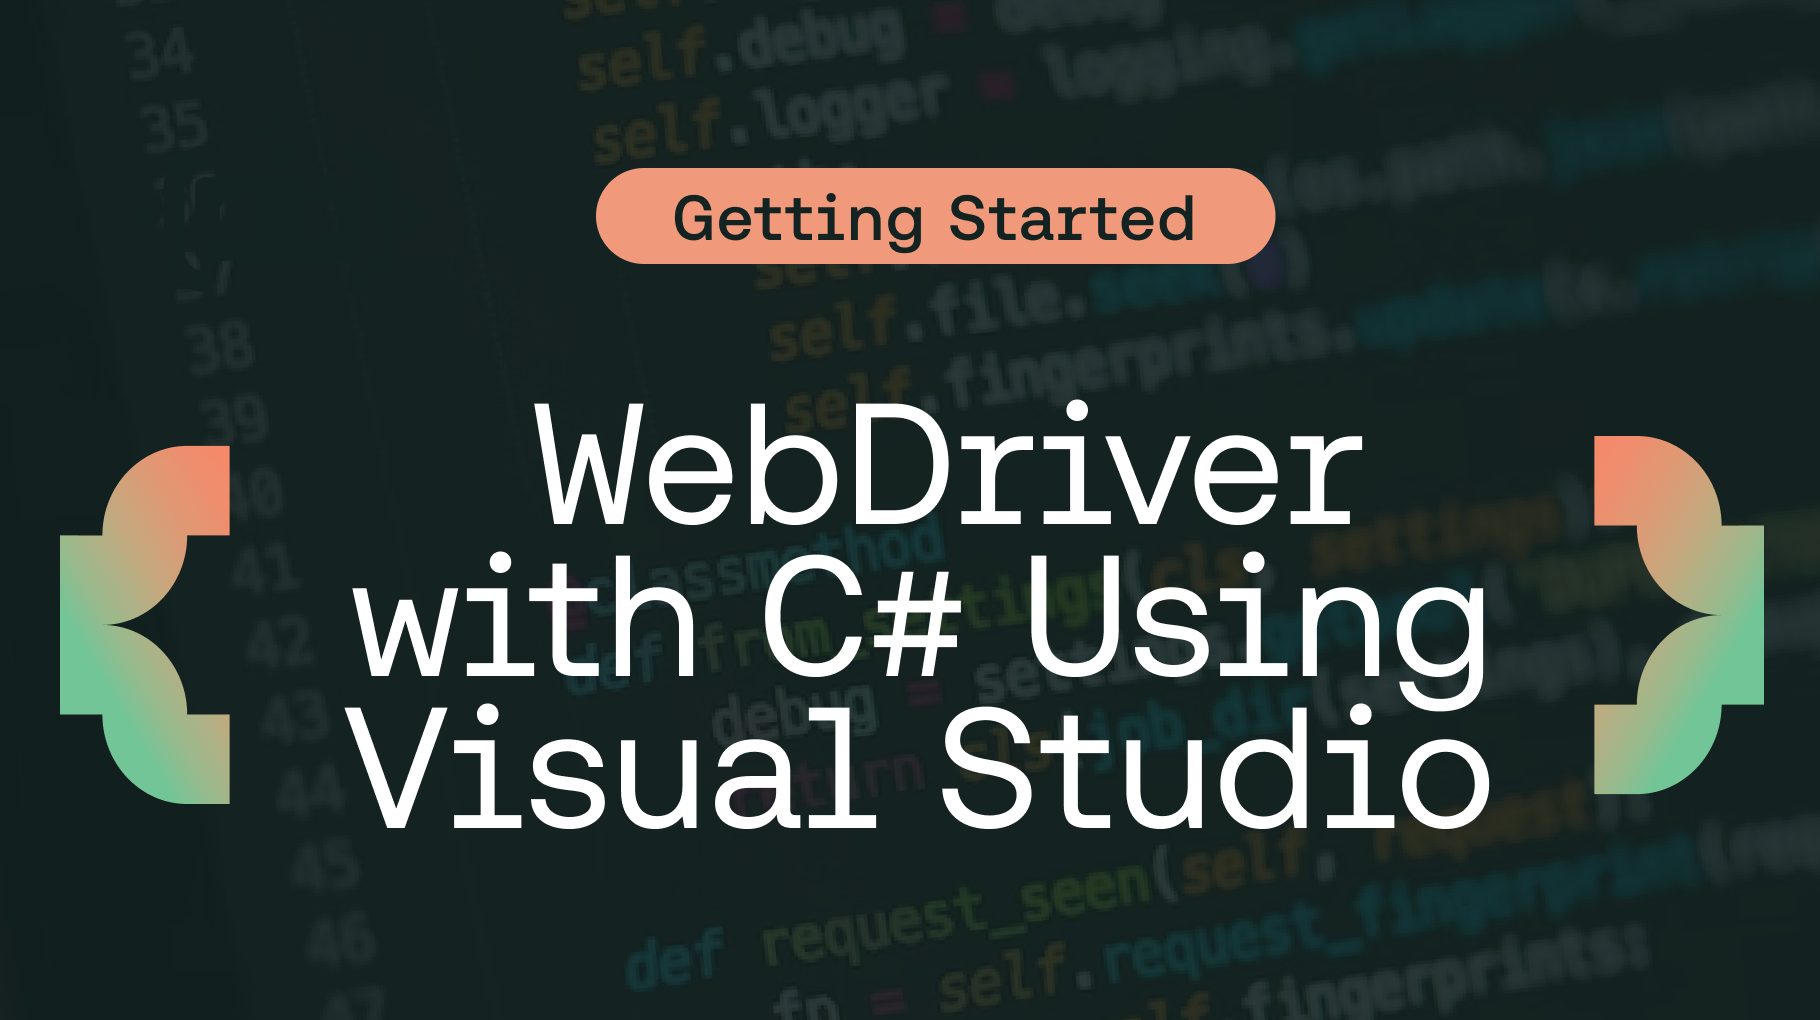 Guide to Getting Started with WebDriver in C# Using Visual Studio